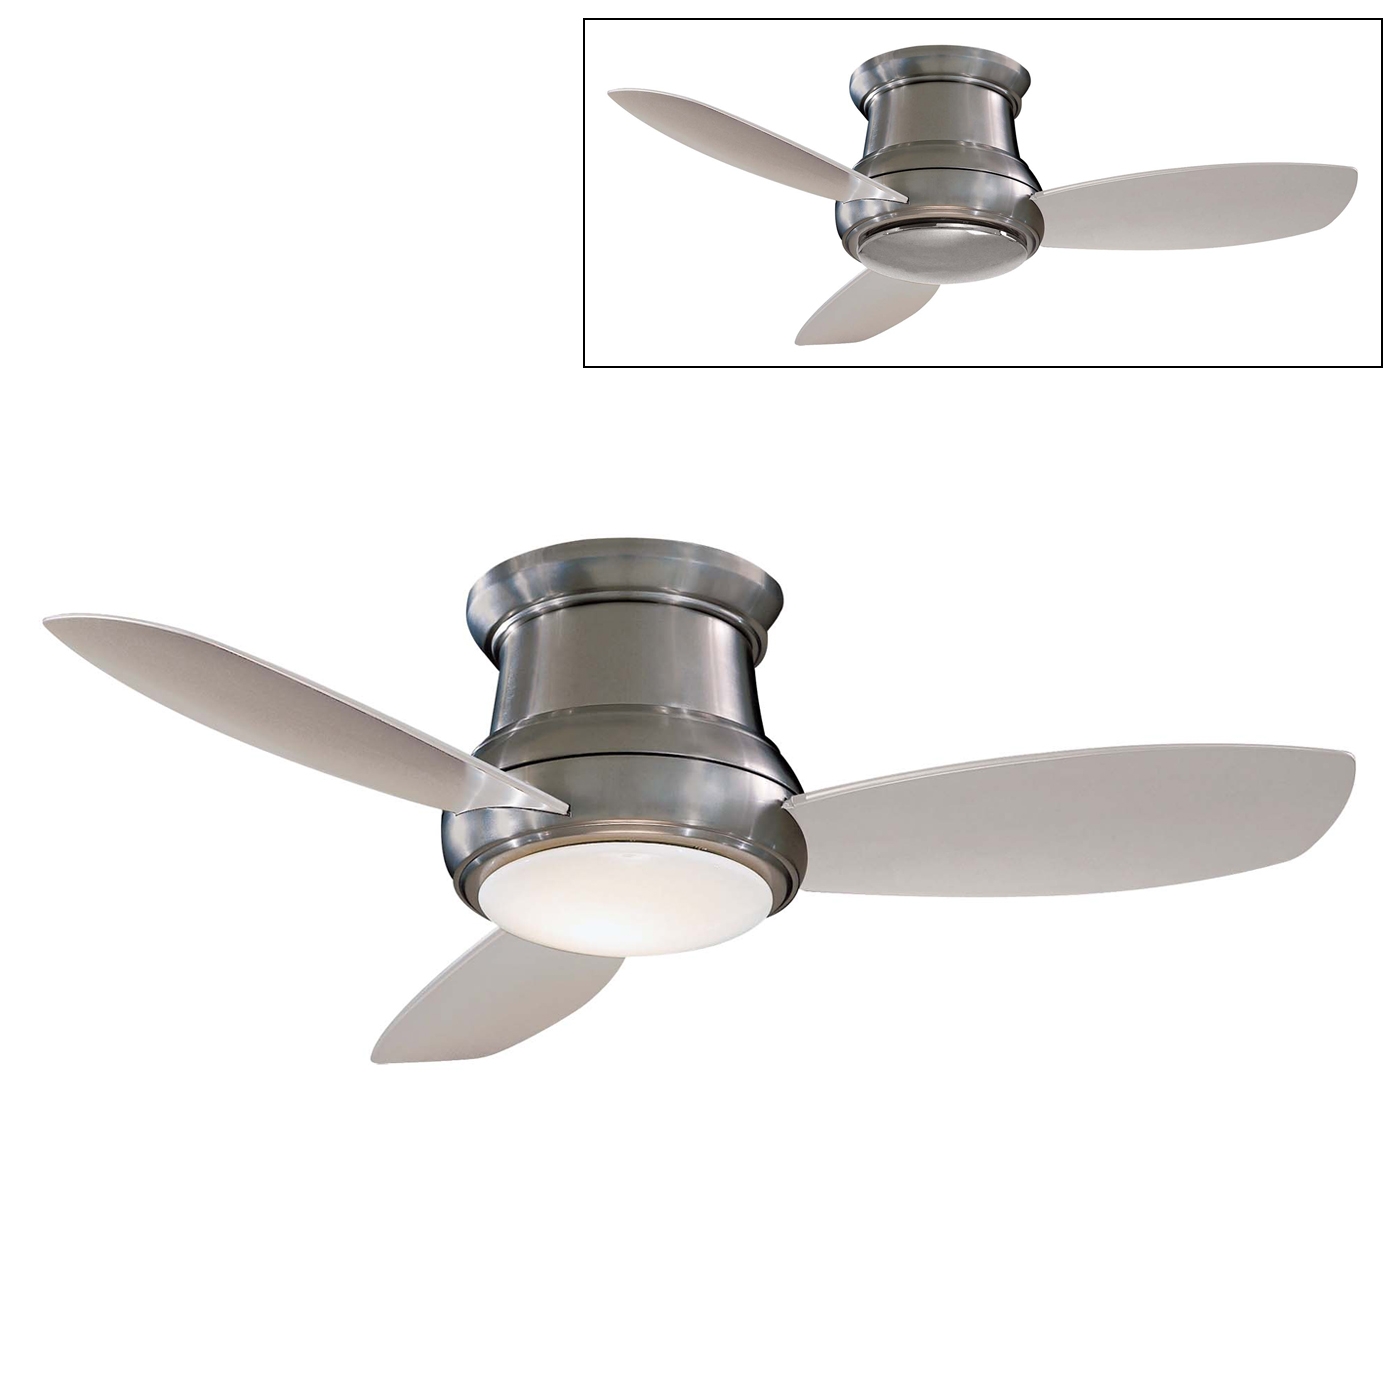 Small Ceiling Fans With Remote Control And Light